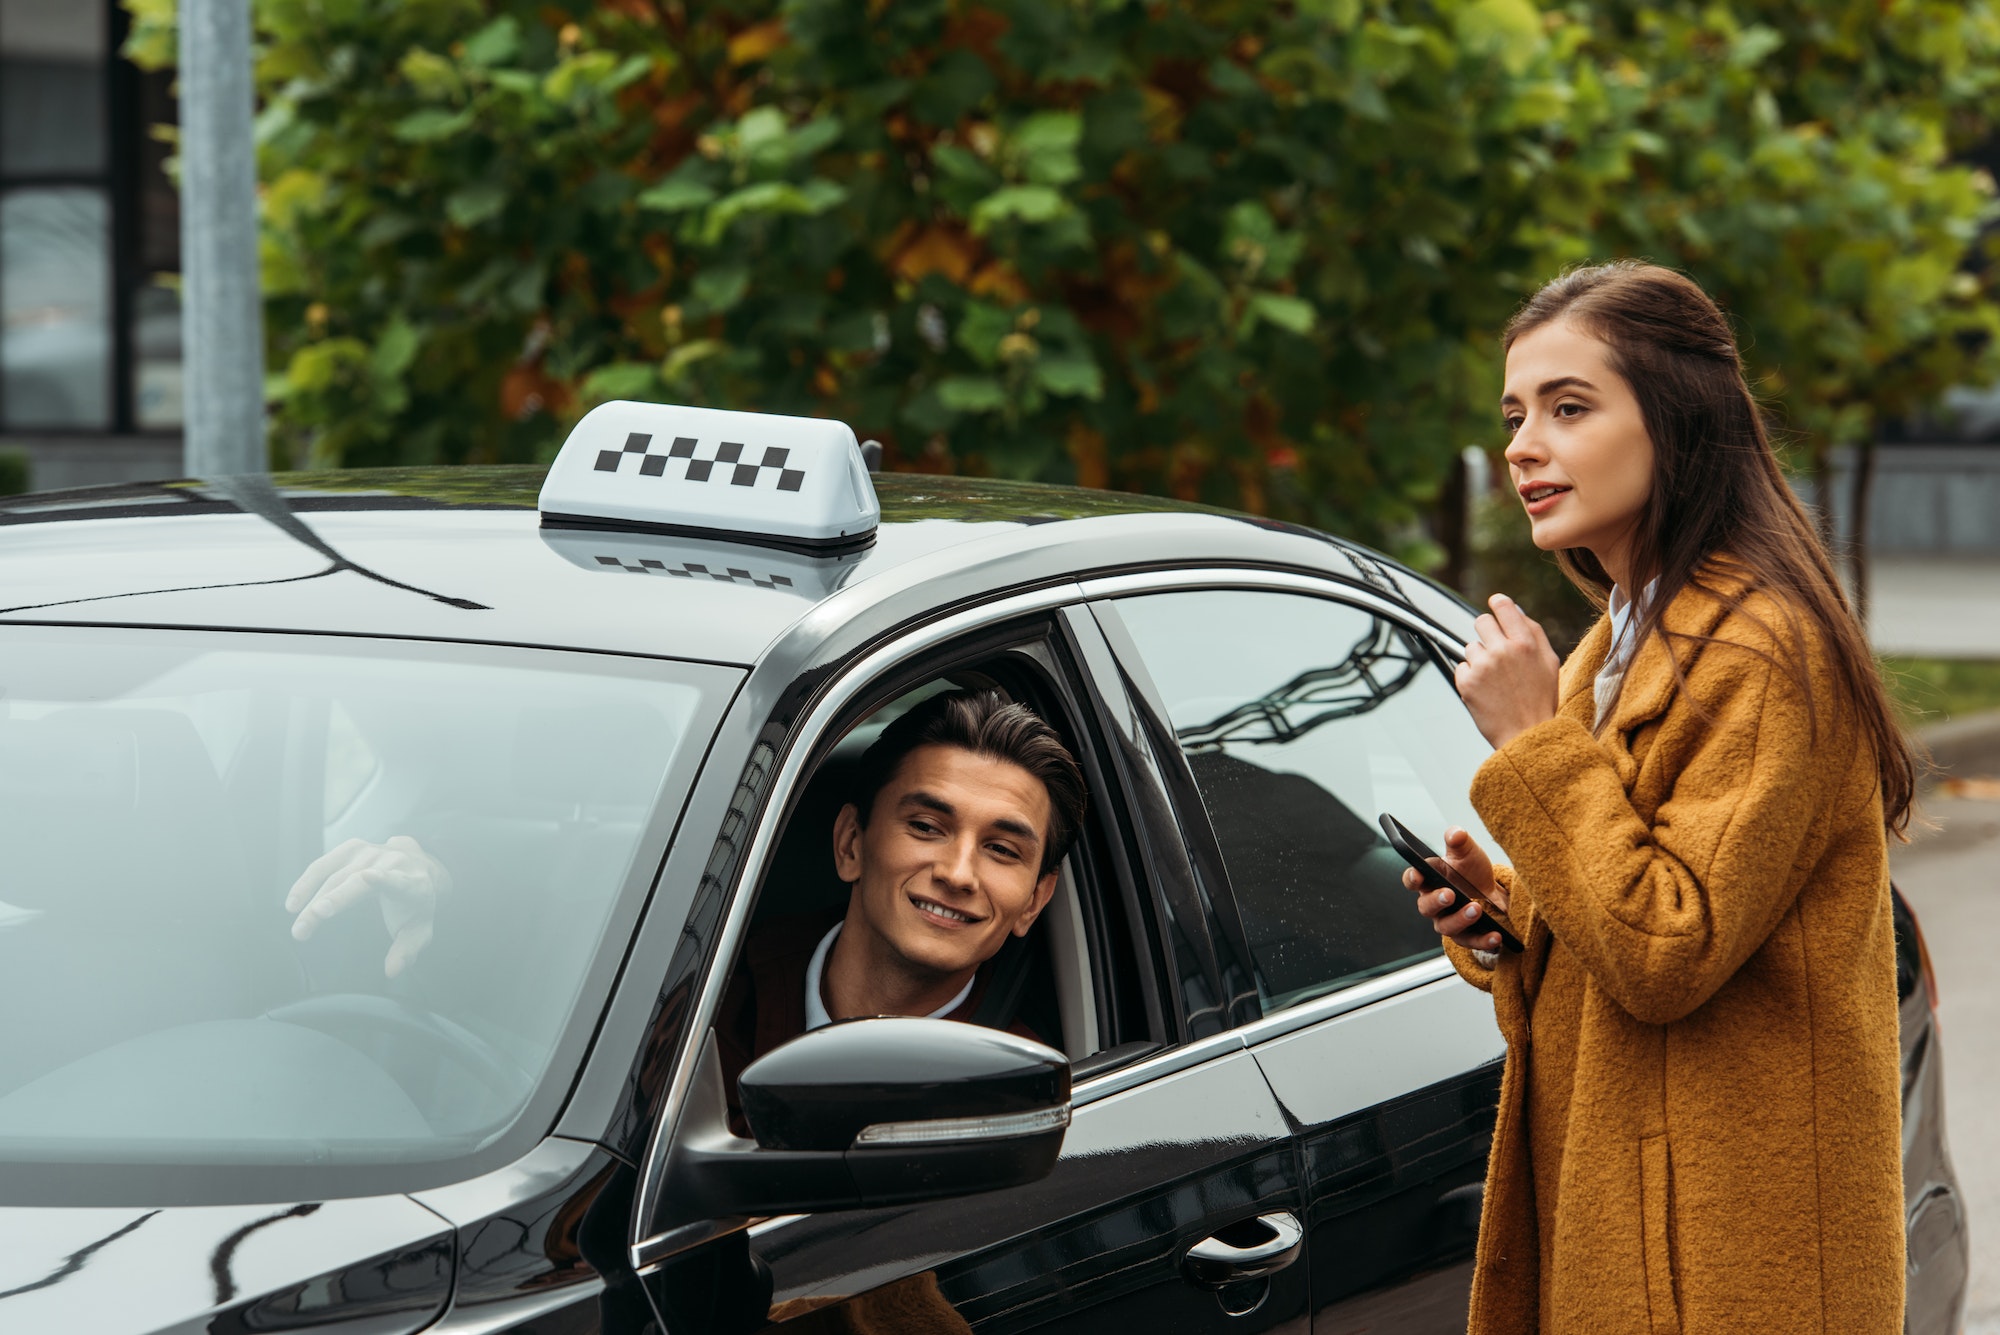 young woman holding smartphone and talking to smiling taxi driver.jpg